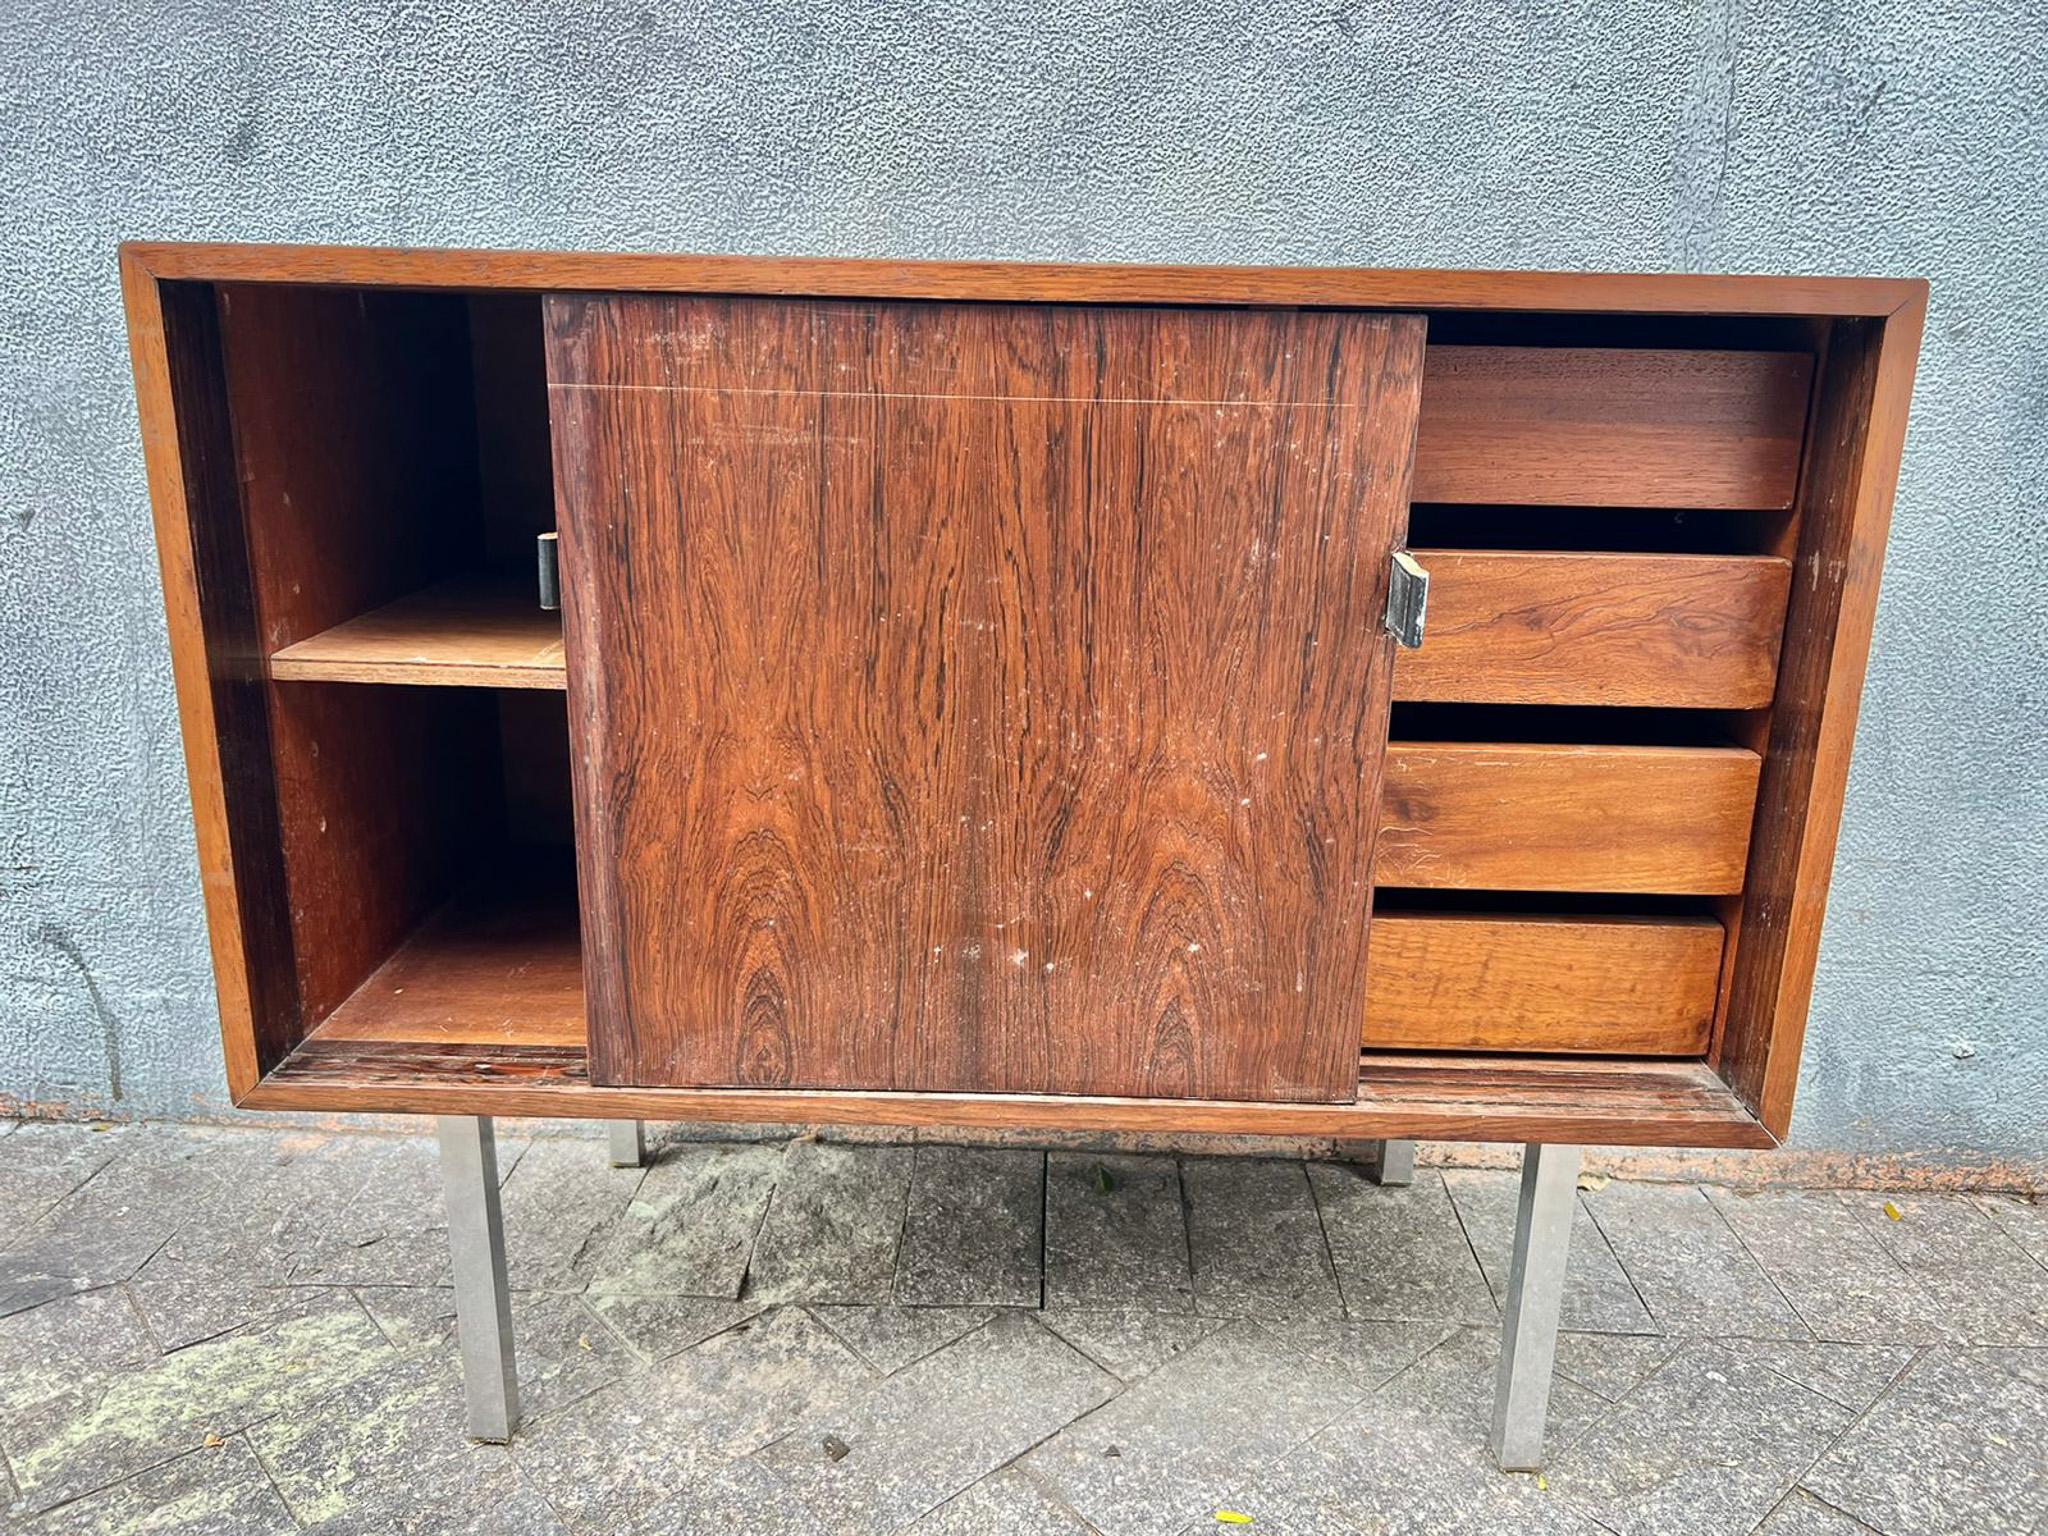 Midcentury Chest in Hardwood & Chrome by Forma Moveis, 1965 Brazil, Sealed For Sale 5